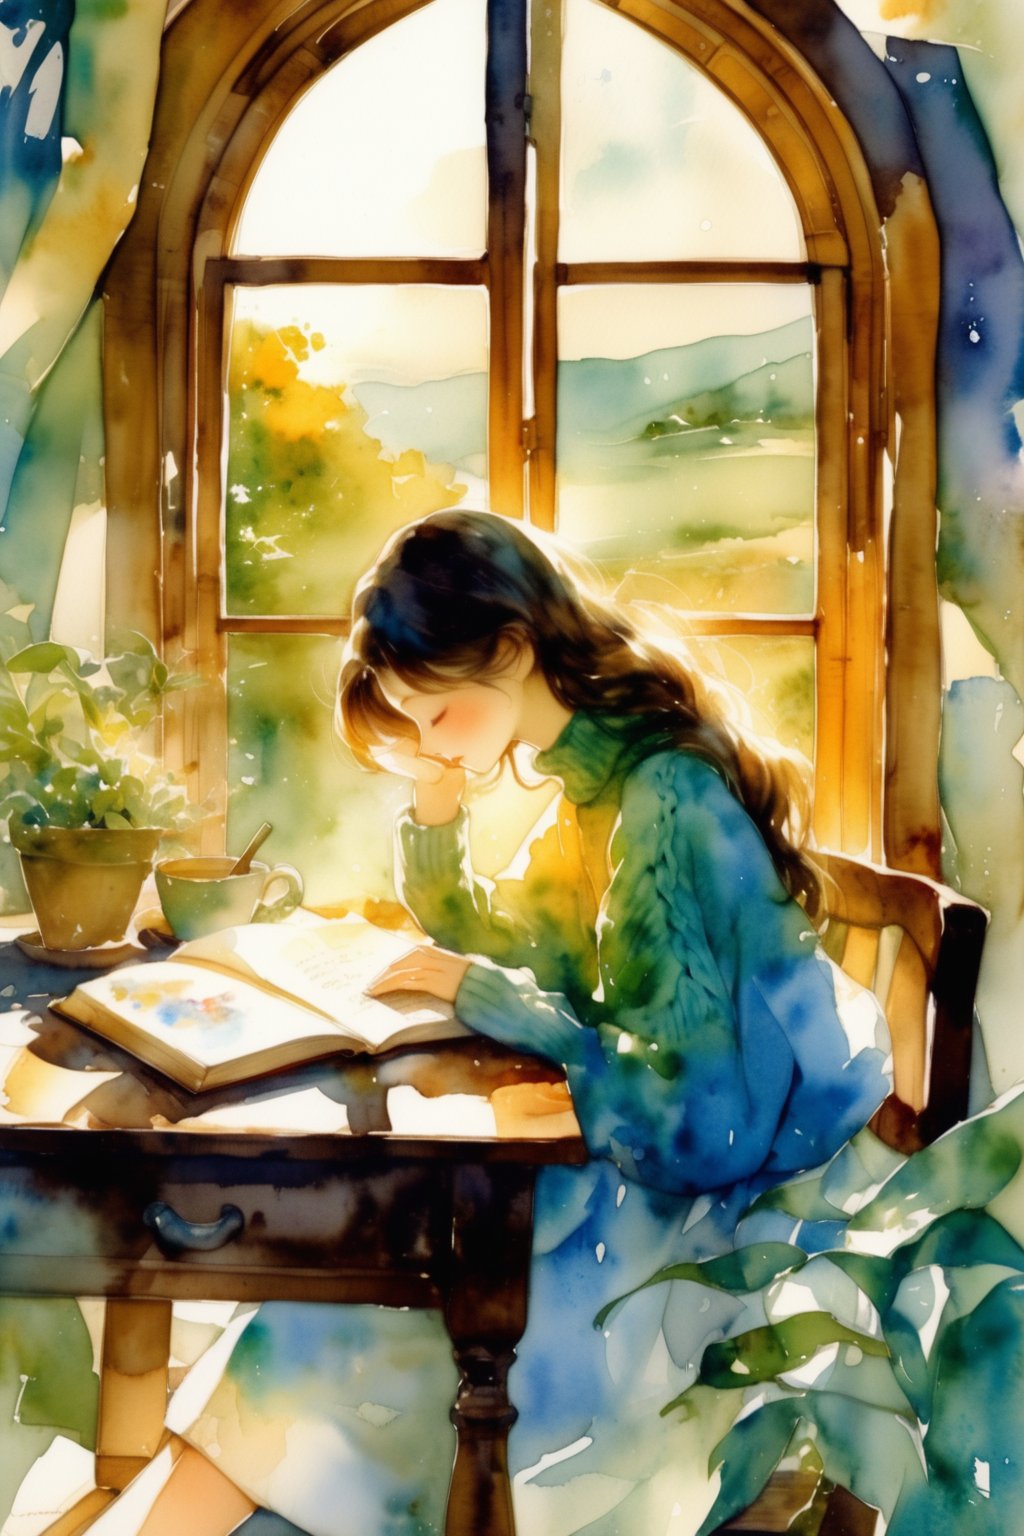 masterpiece, high quality, 8K, high_res, ink lines and watercolor wash,
homemade photoshot, melancholy embience, a girl holds her chin and looks out the window, thoughtfully, (in the tranquility of the book pages and panes, nature and wisdom are whispering, no matter it is sunny or rainy.) Stationery is scattered on the table, hot tea, minimalist style, watercolor rendering, elegant colors, loose knitted turtleneck sweater, monochrome picture, sad, beautiful, elegant, very detailed, establishing shot, background,scenery
,CrclWc,CuteSt1,WtrClr,watercolor \(medium\)